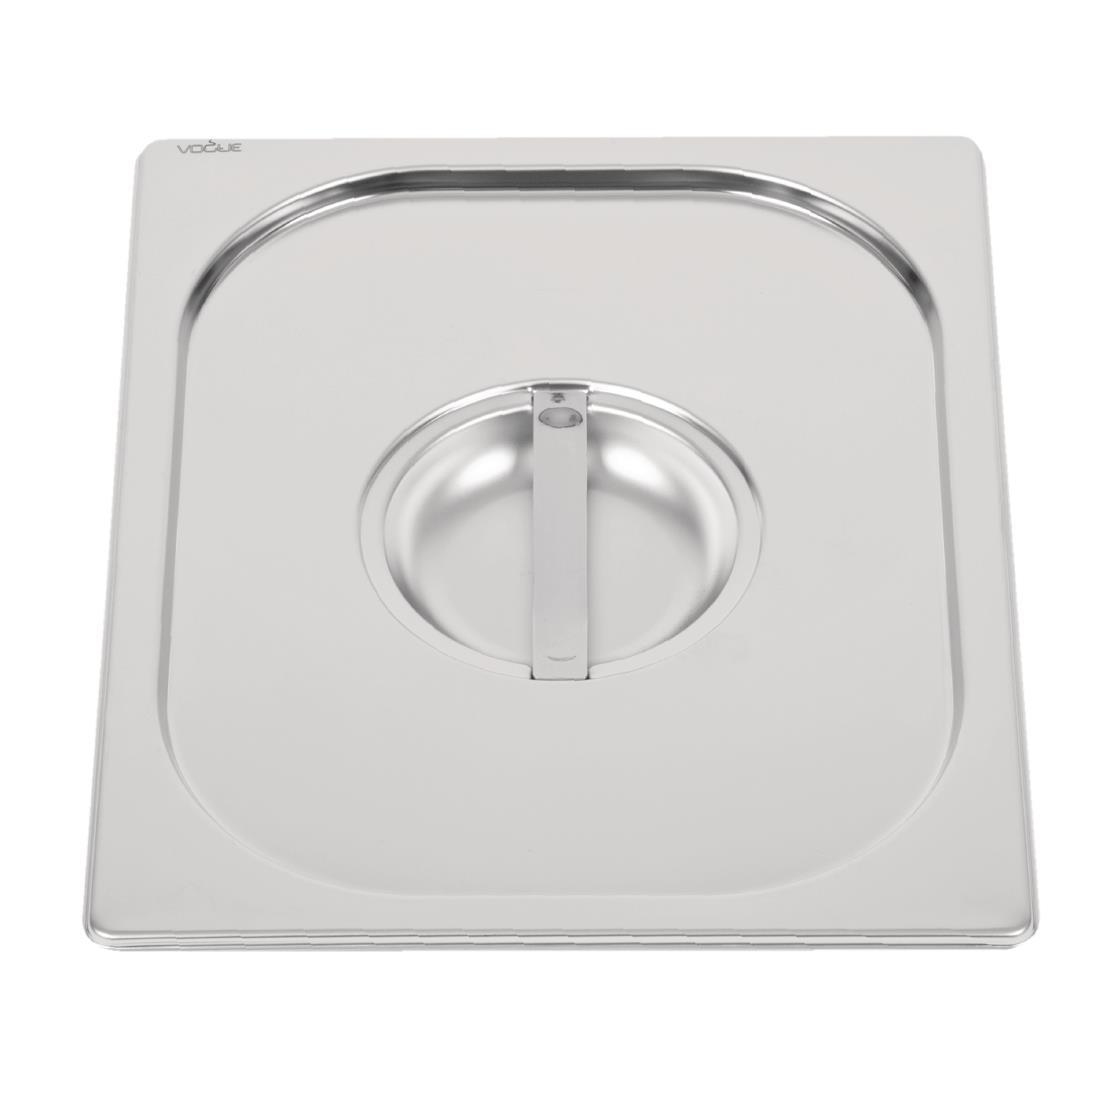 Vogue Heavy Duty Stainless Steel 1/2 Gastronorm Pan Lid - DW456  - 2